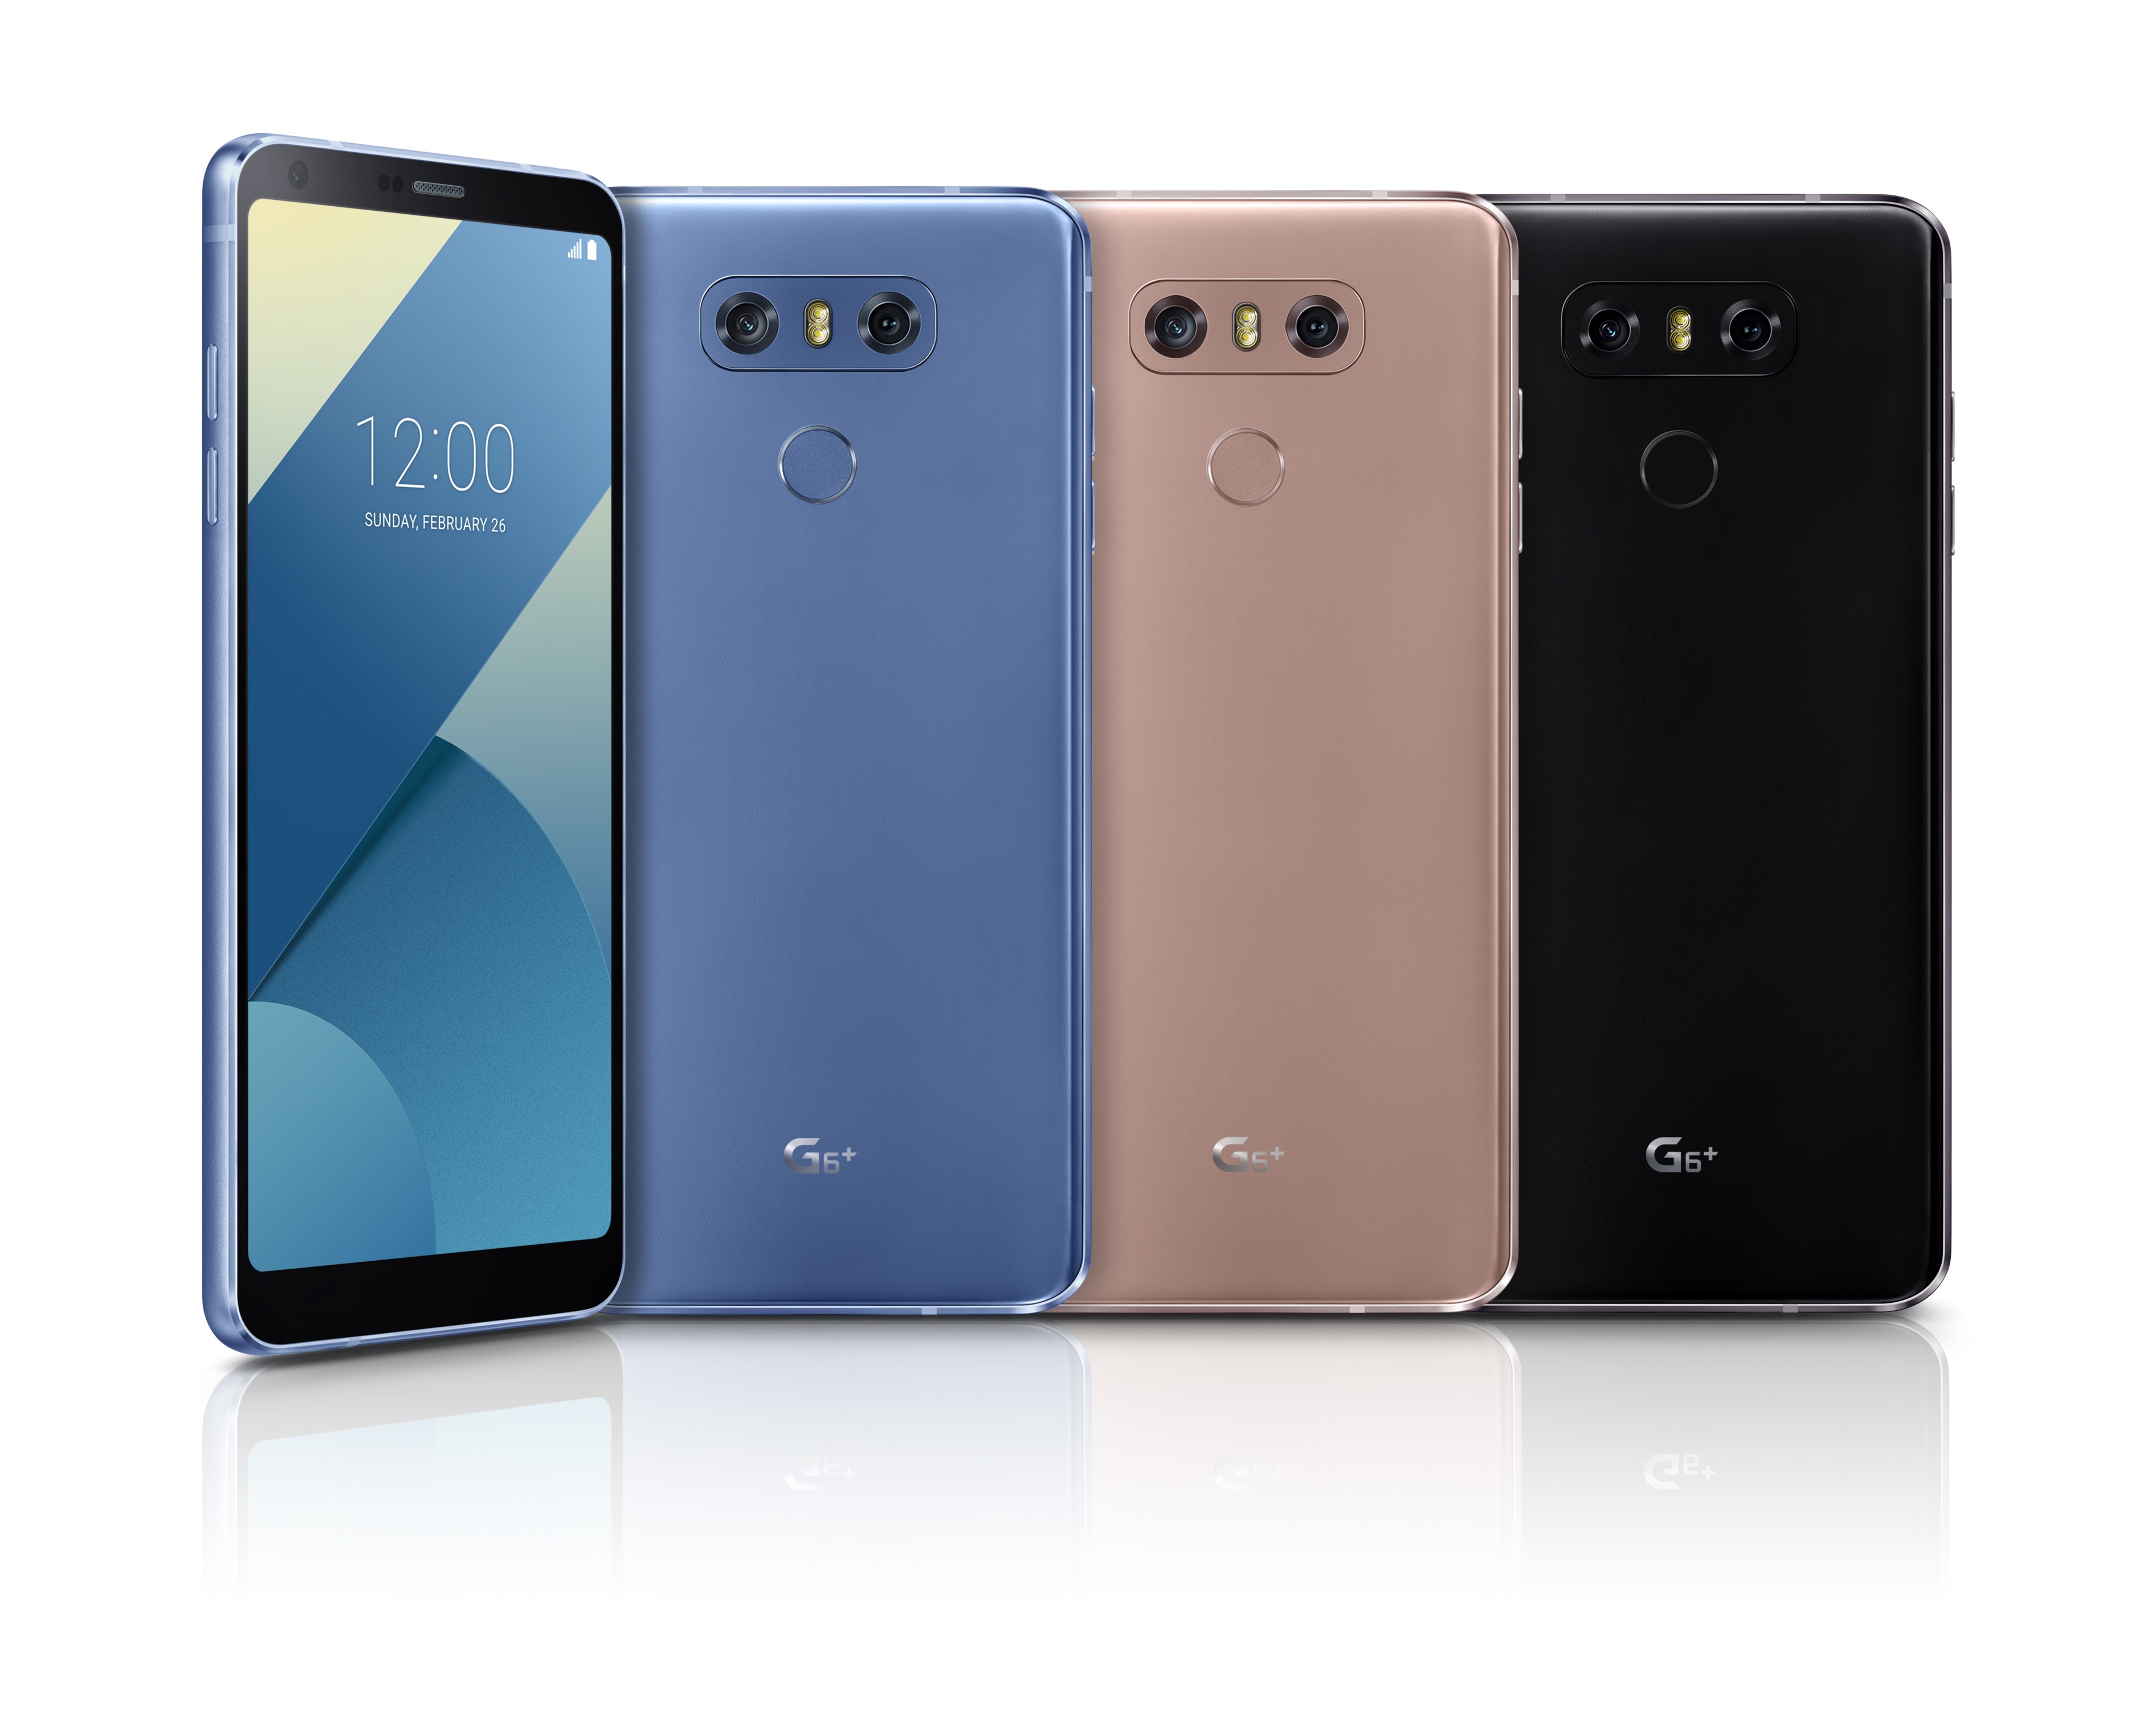 LG G6+ in blue, gold and black